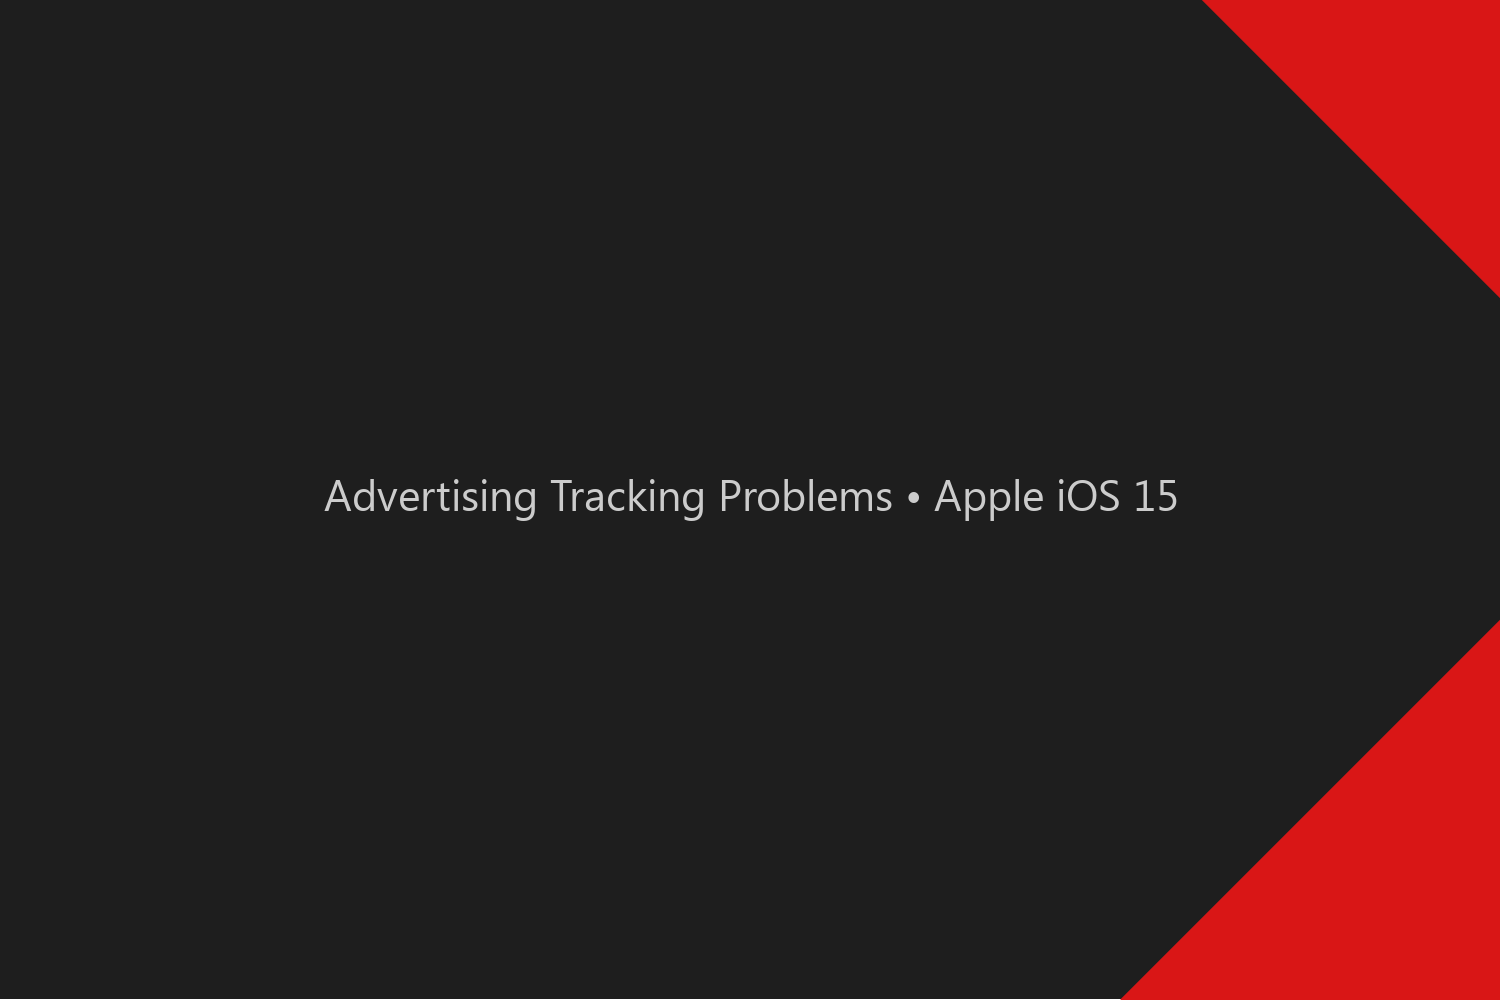 Advertising Tracking Problems • Apple iOS 15